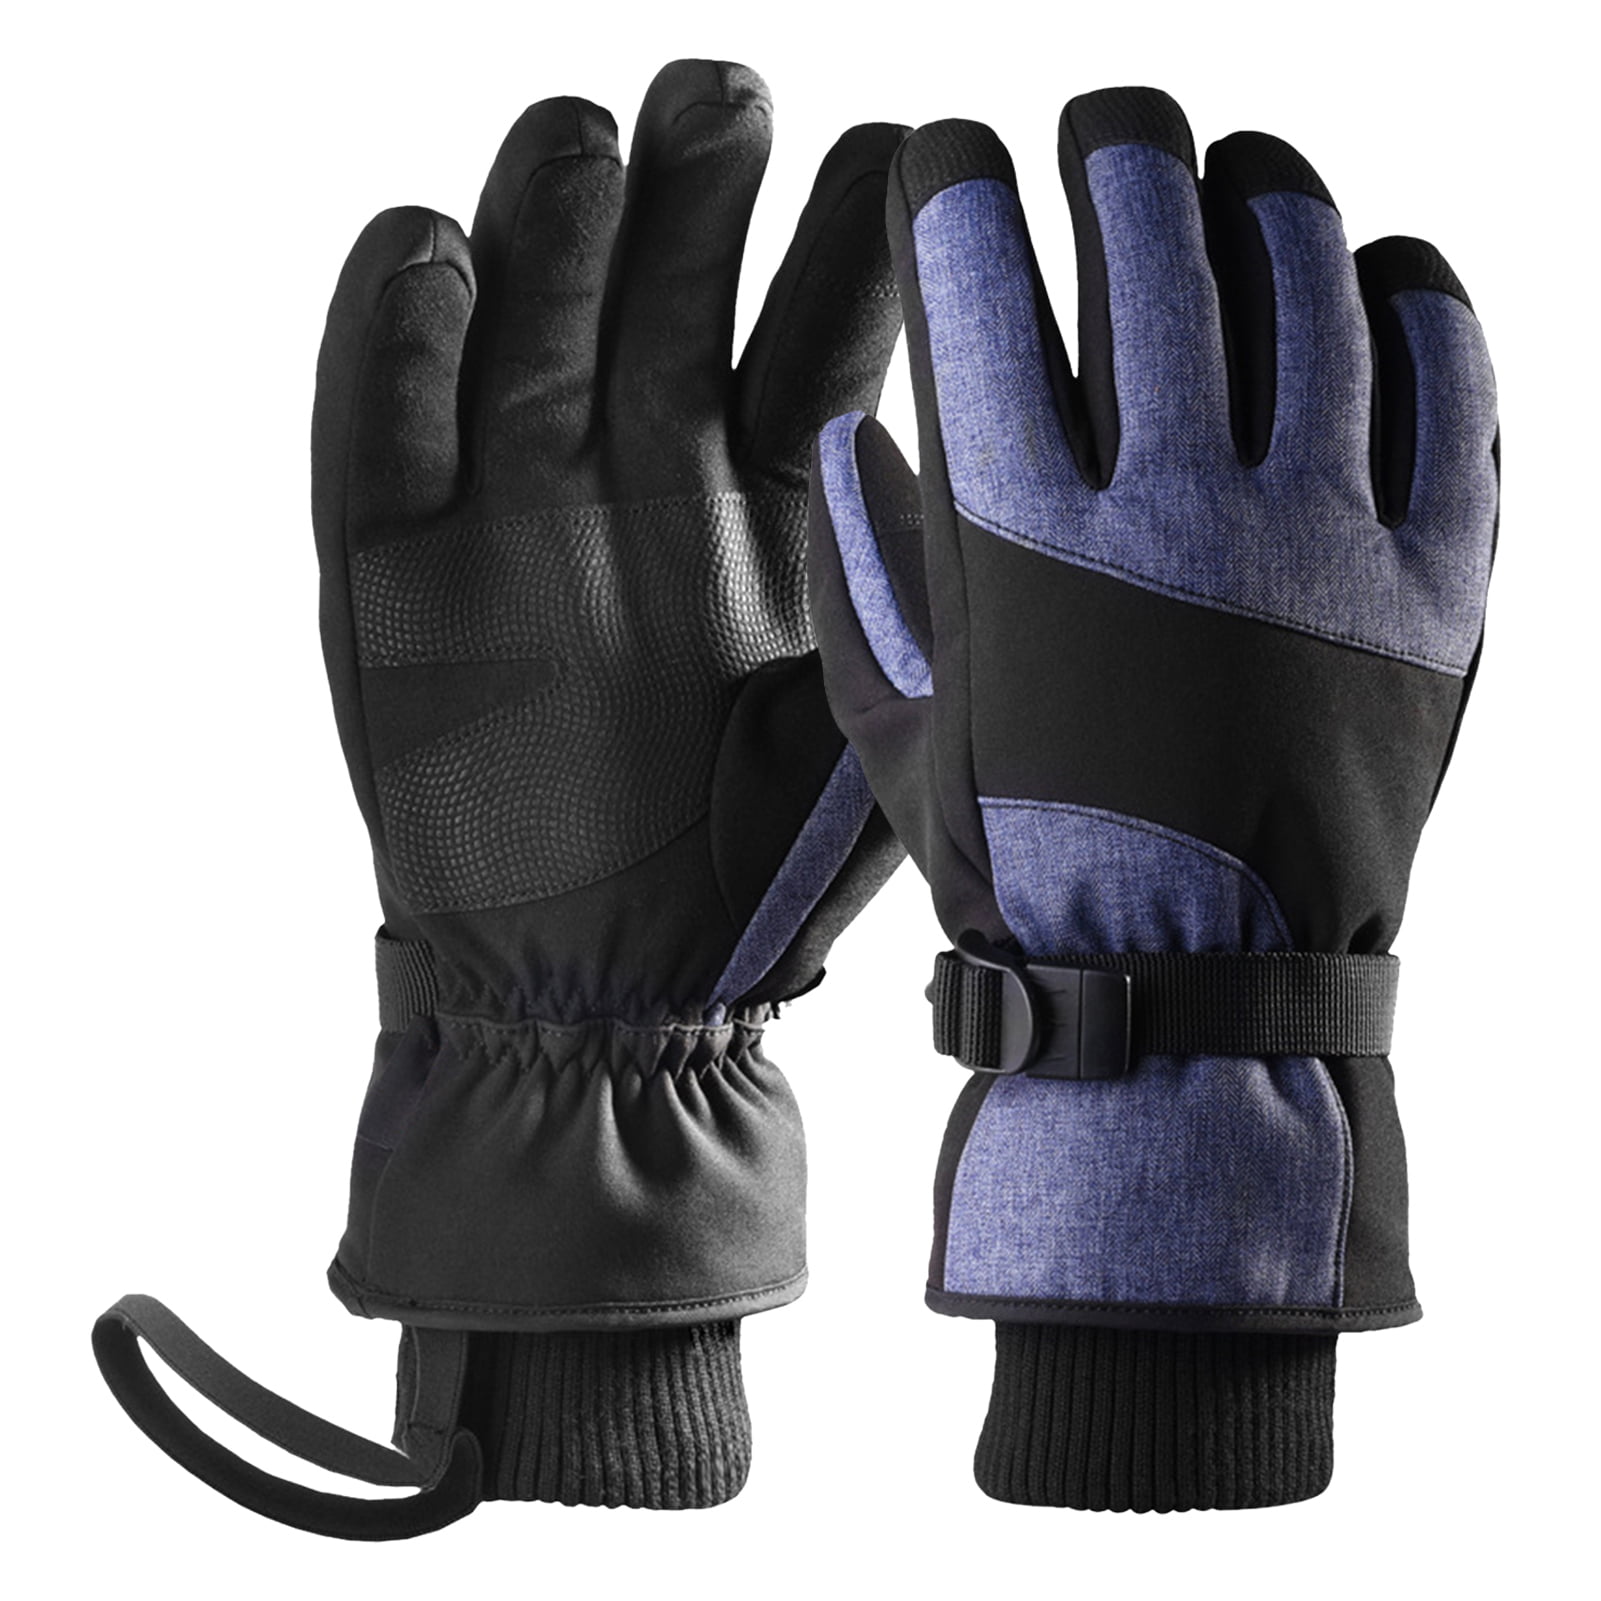 Details about   Full Finger Motorcycle Winter Gloves Touch Screen Adjustable Elastic Sport Glove 